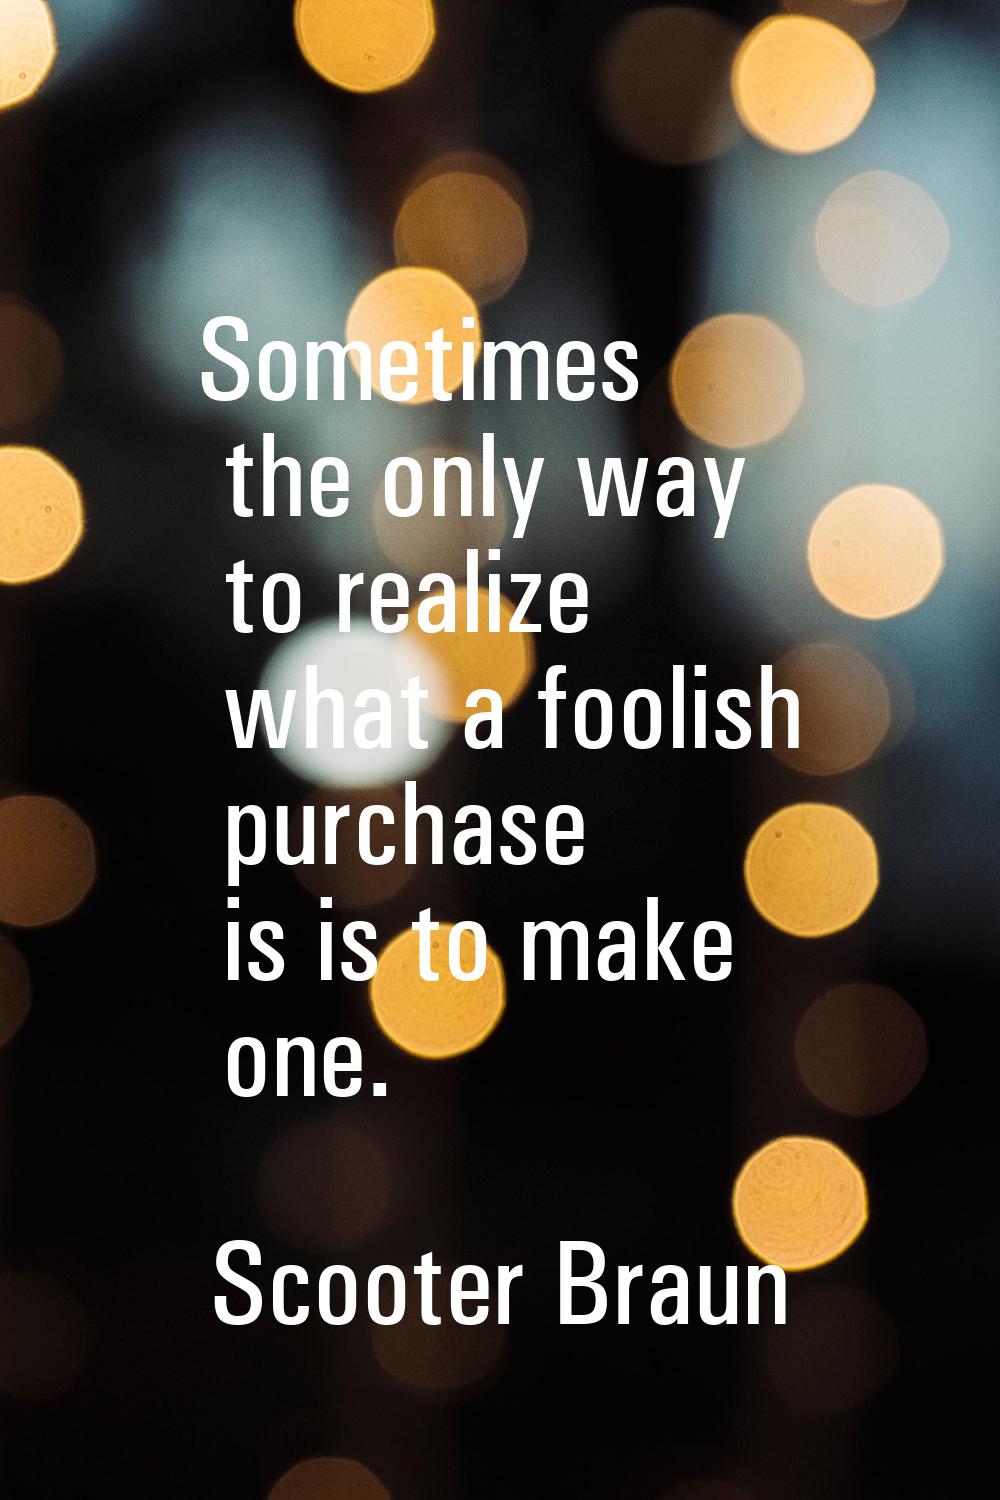 Sometimes the only way to realize what a foolish purchase is is to make one.